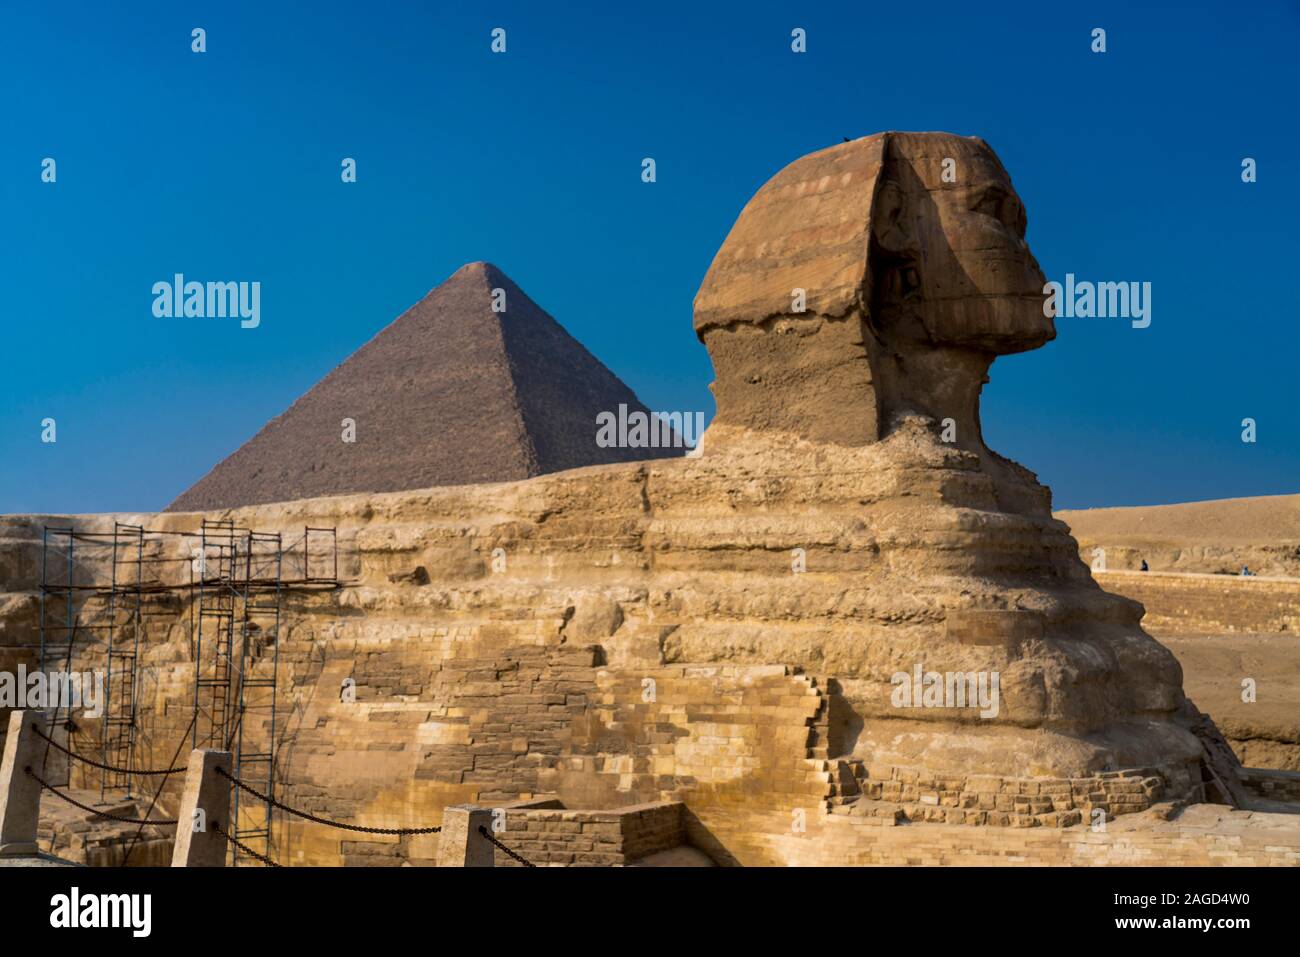 NOVEMBER 2019, CAIRO EGYPT, Sphinx with view  of the Great Pyramids of Giza, Cairo, Egypt Stock Photo